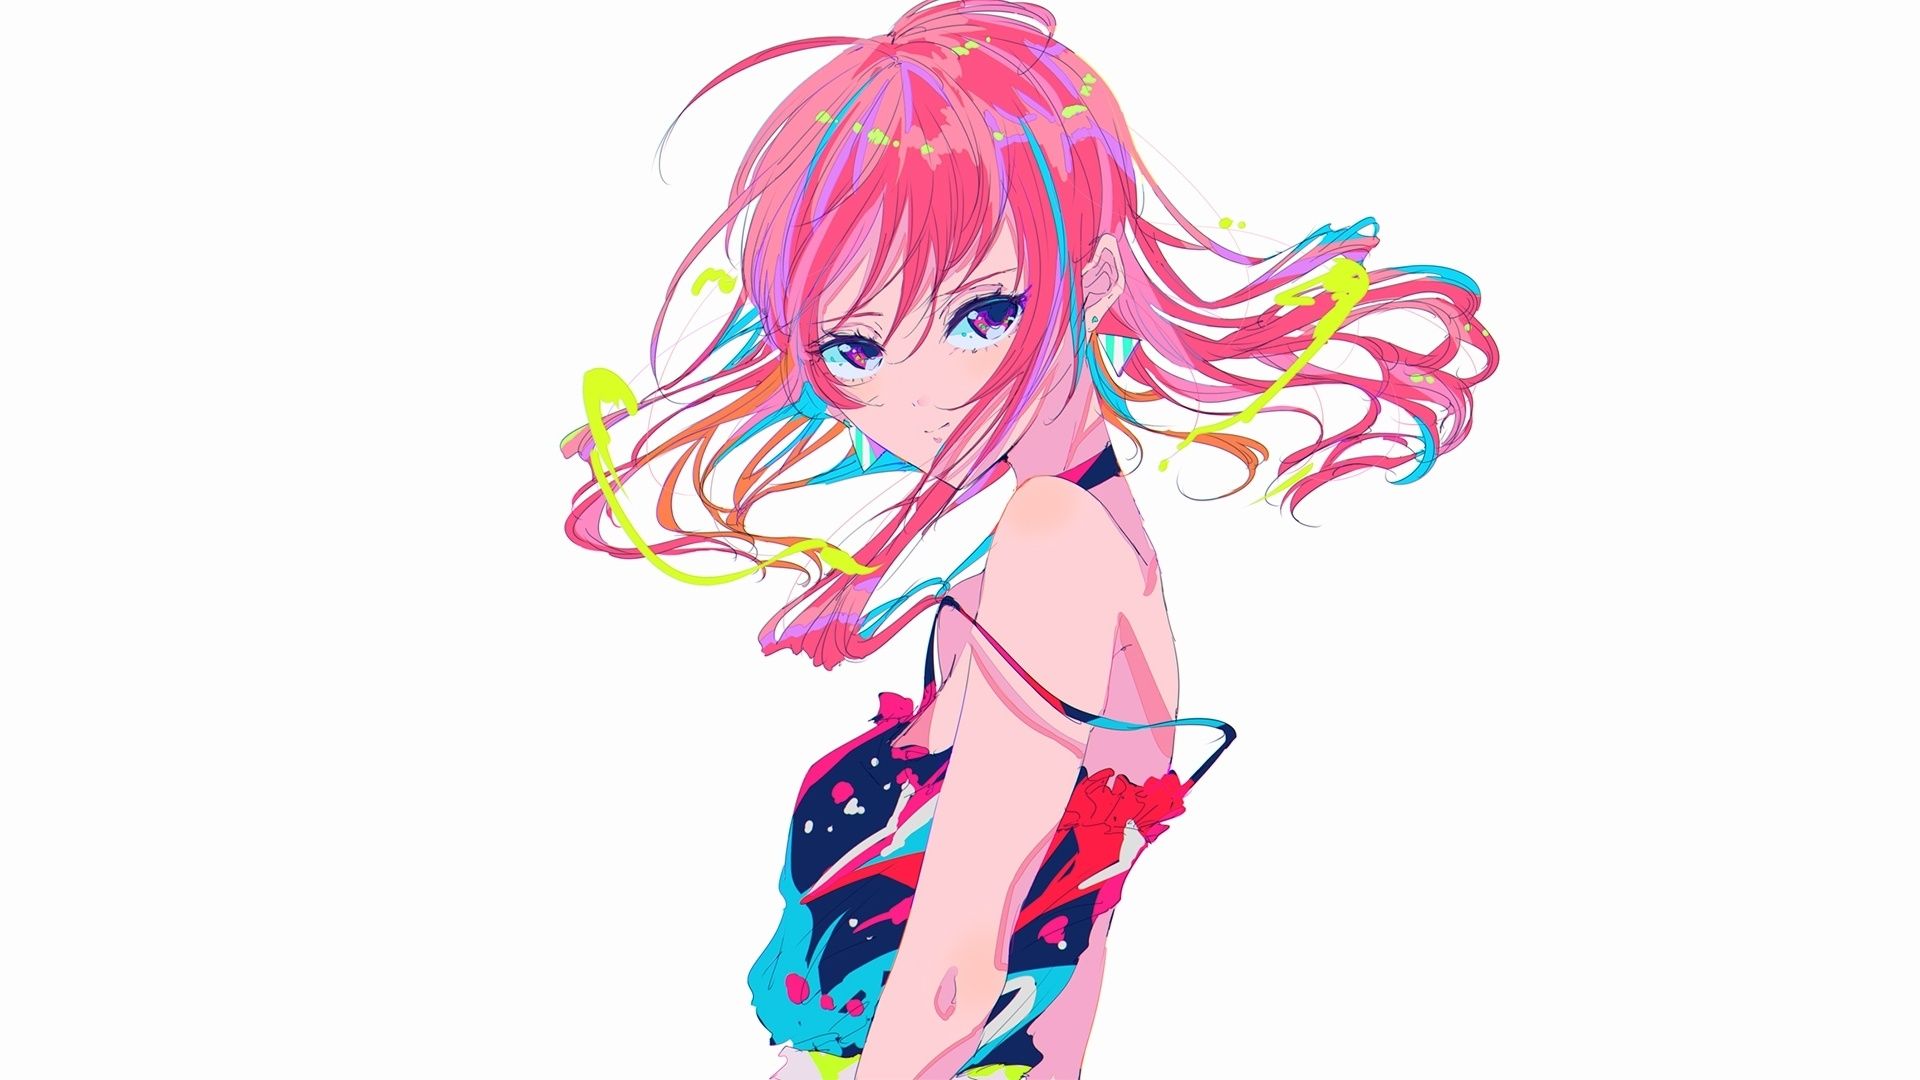 Anime girl, colorful hair and clothes, minimal wallpaper, HD image, picture, background, efcbb8